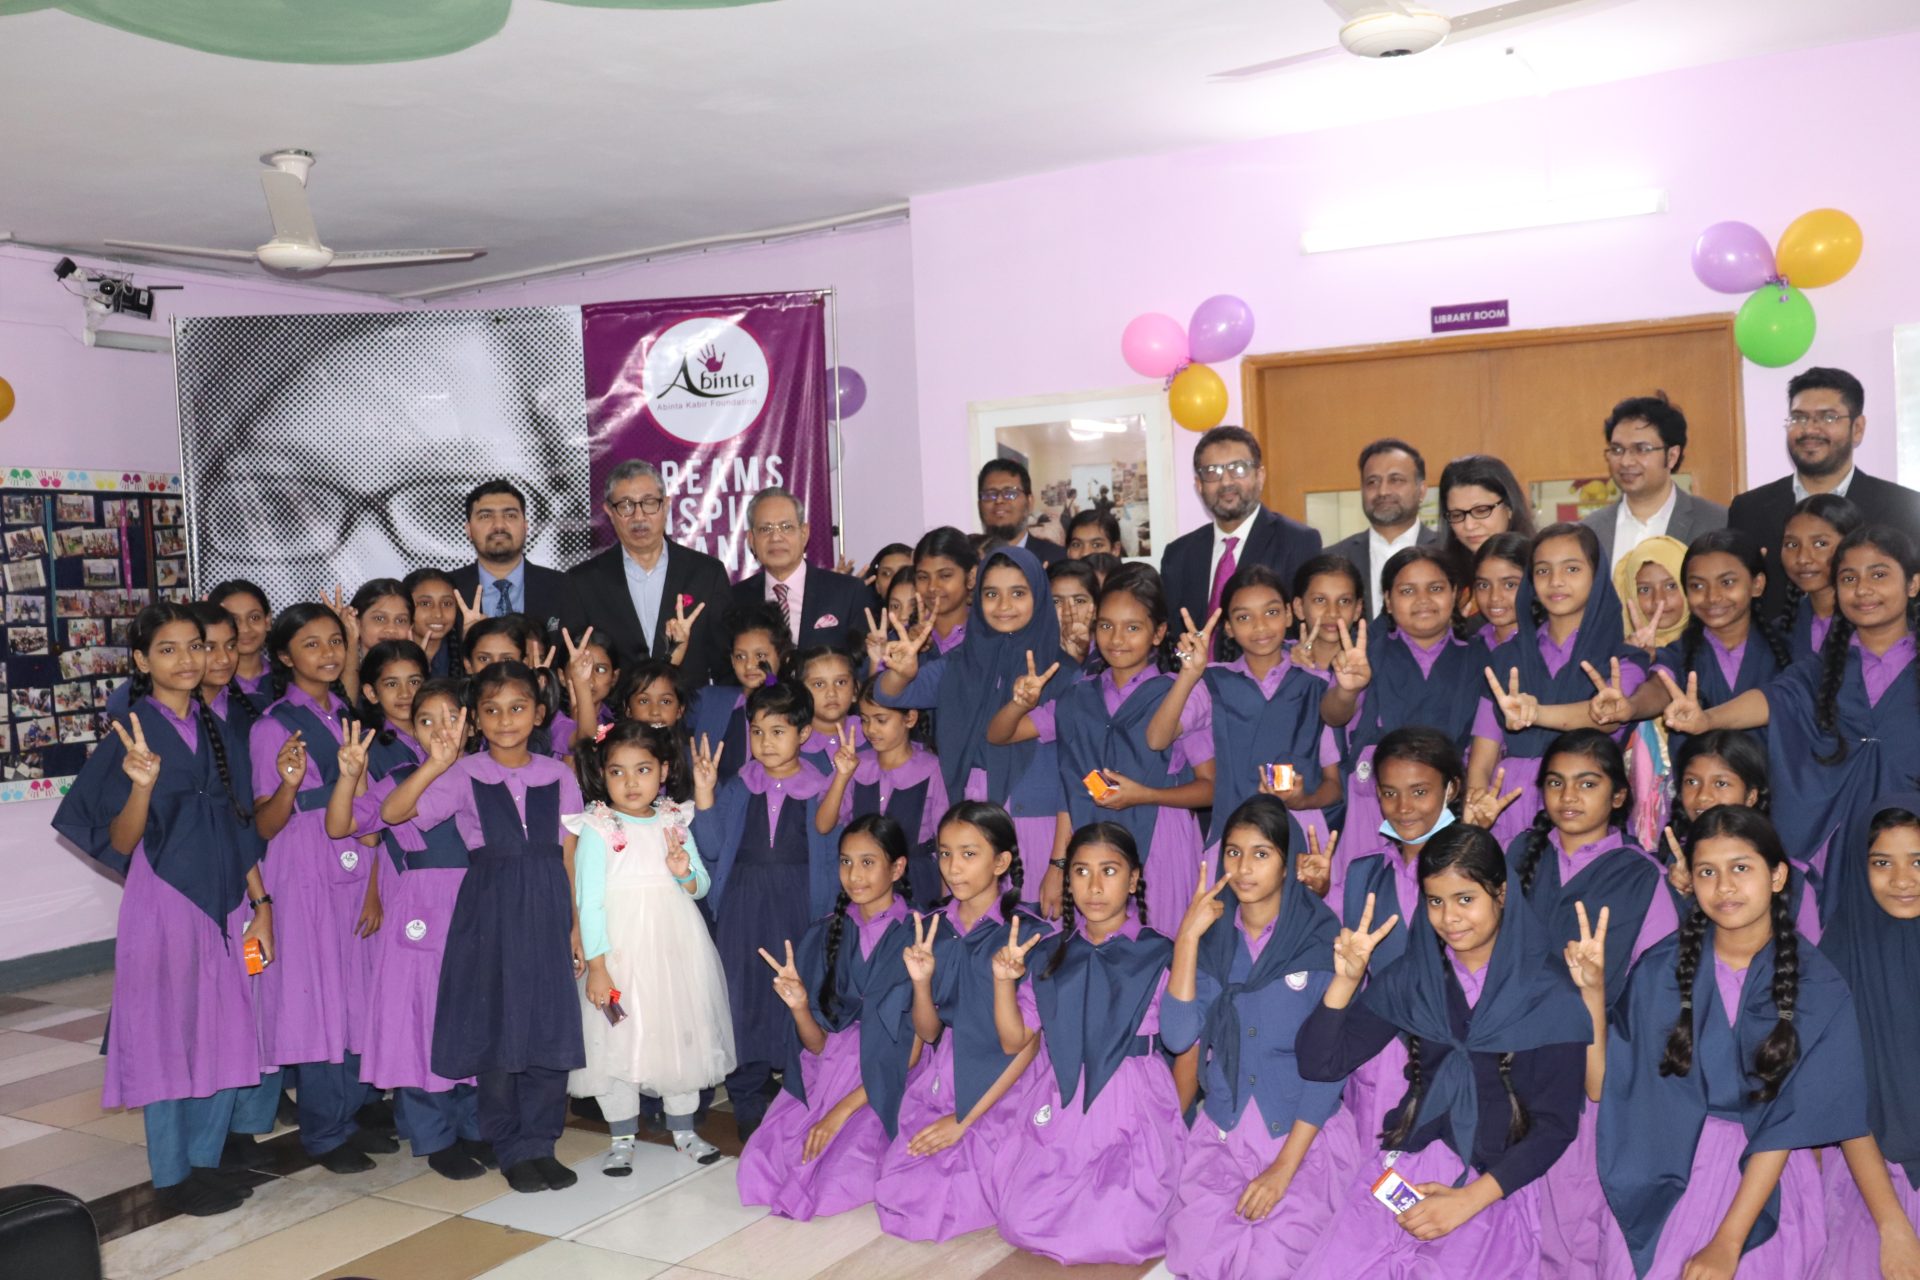 Managing Director and CEO Mr. Emranul Huq of Dhaka Bank visited the school to inaugurate the new school year.